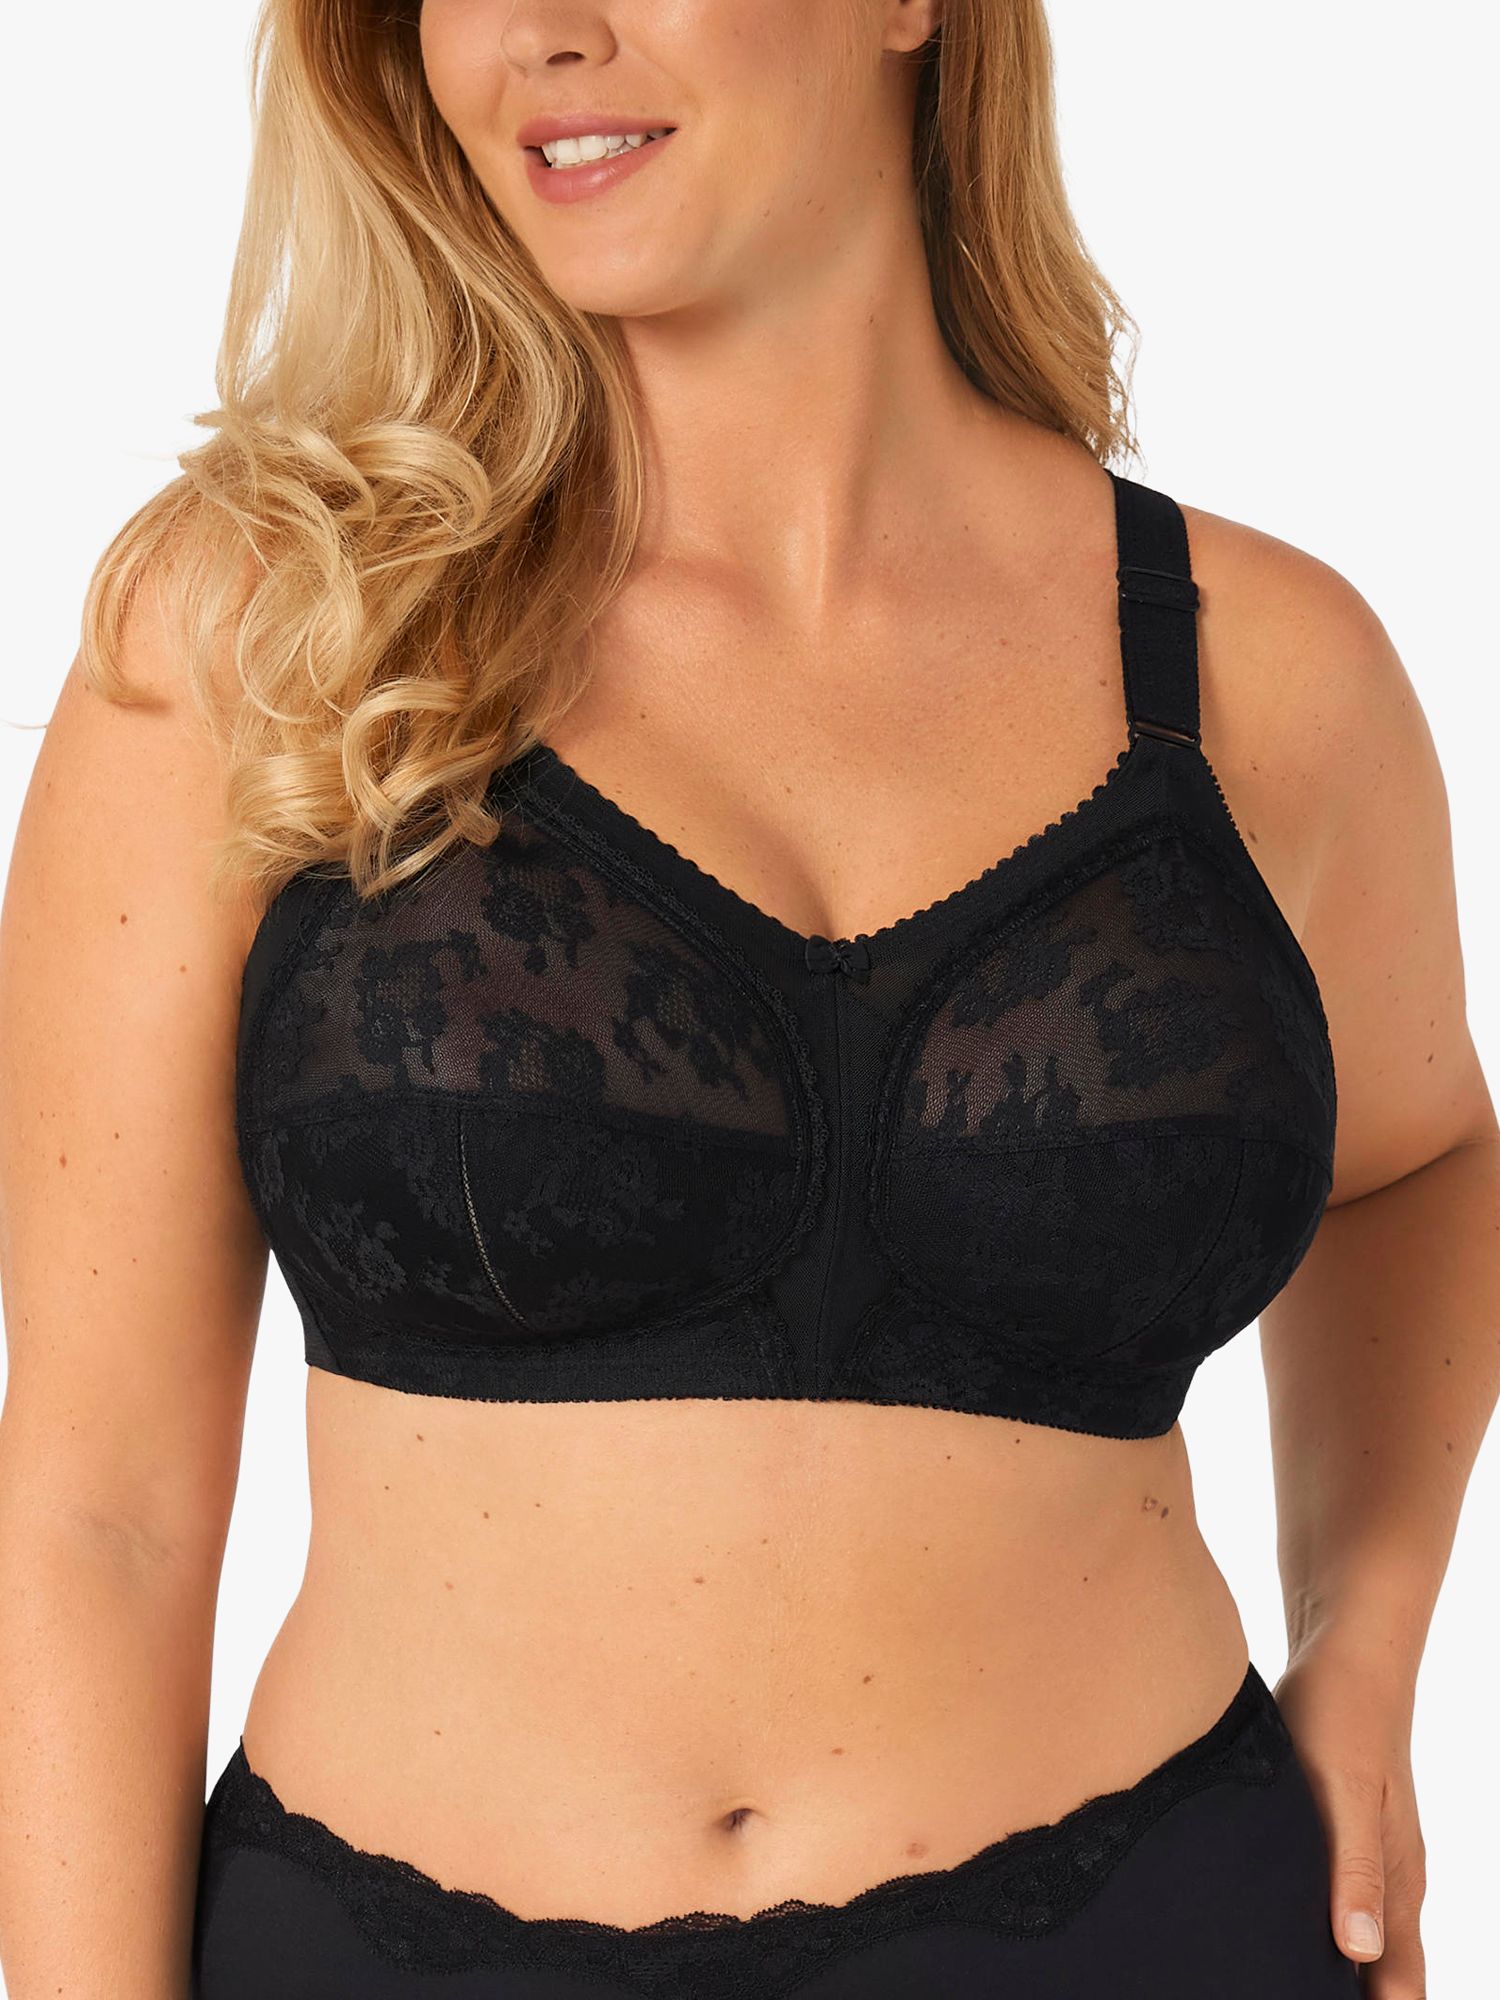 Ample Bosom - “Best bra ever! The bra is very supportive